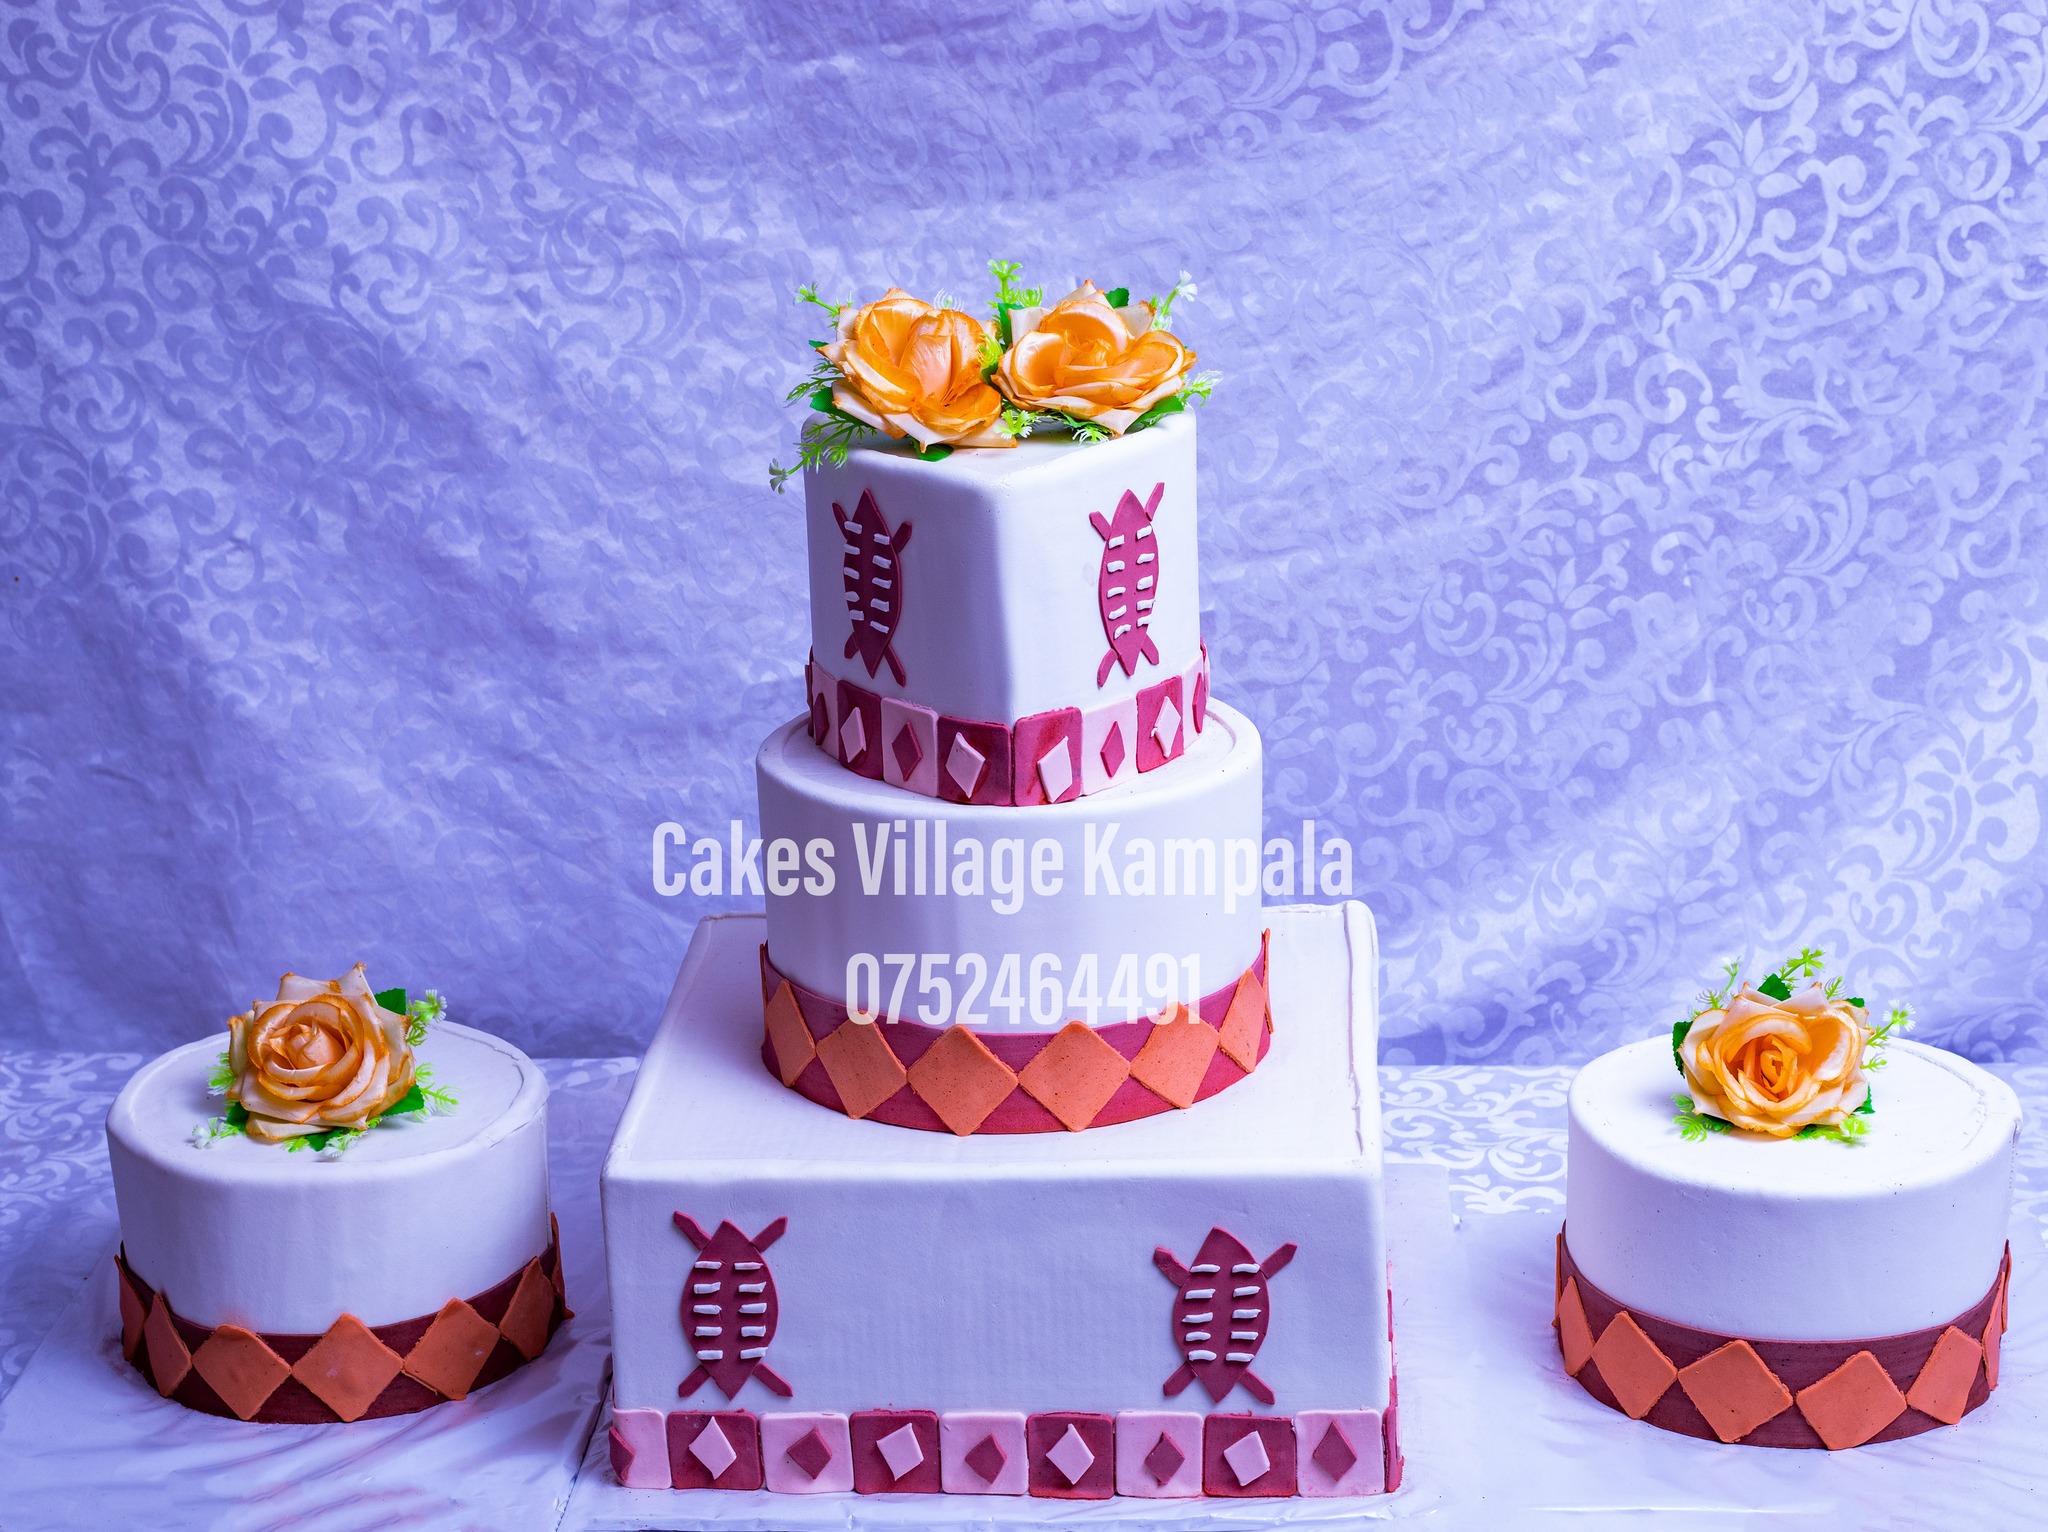 wedding cake with 4 give away cakes/side cakes